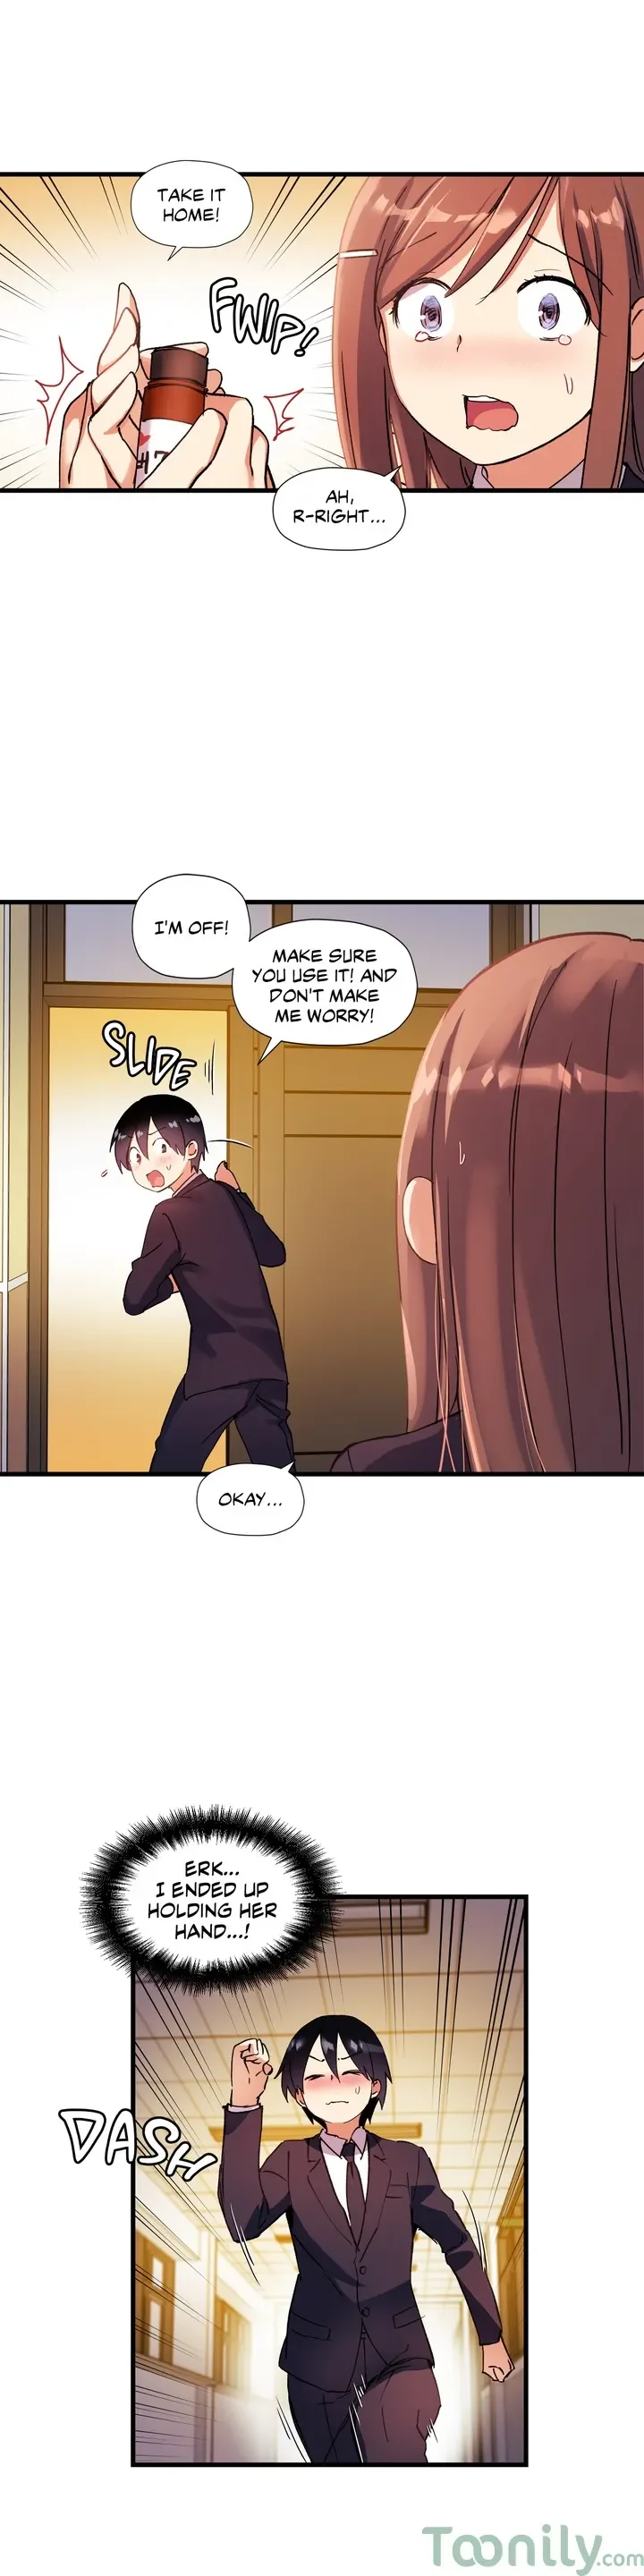 under-observation-my-first-loves-and-i-chap-34-15